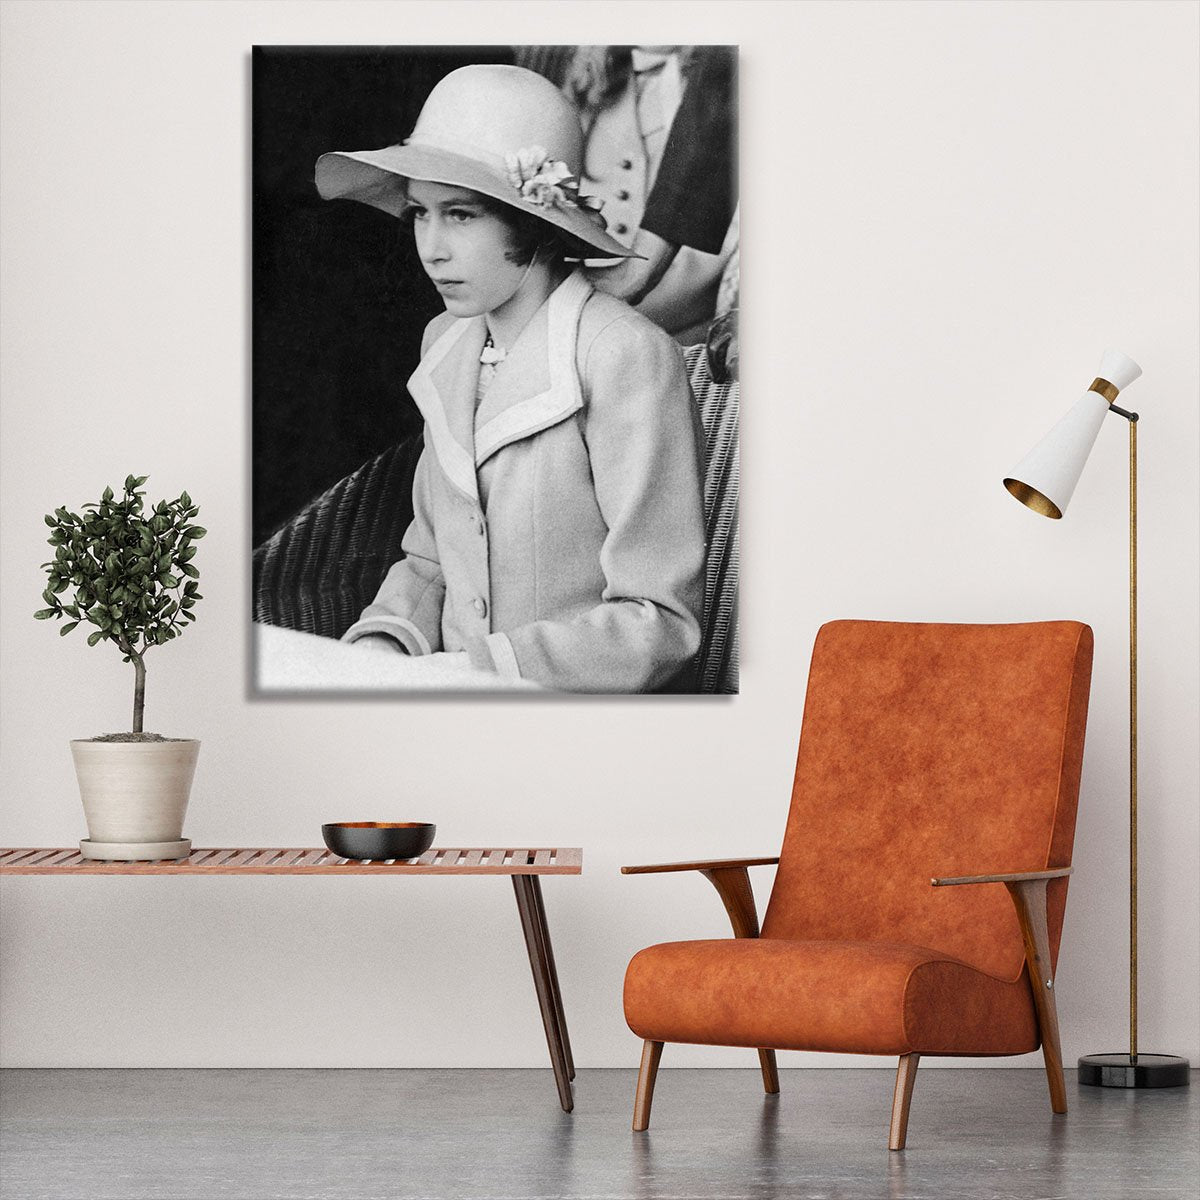 Queen Elizabeth II as a child seated in a hat Canvas Print or Poster